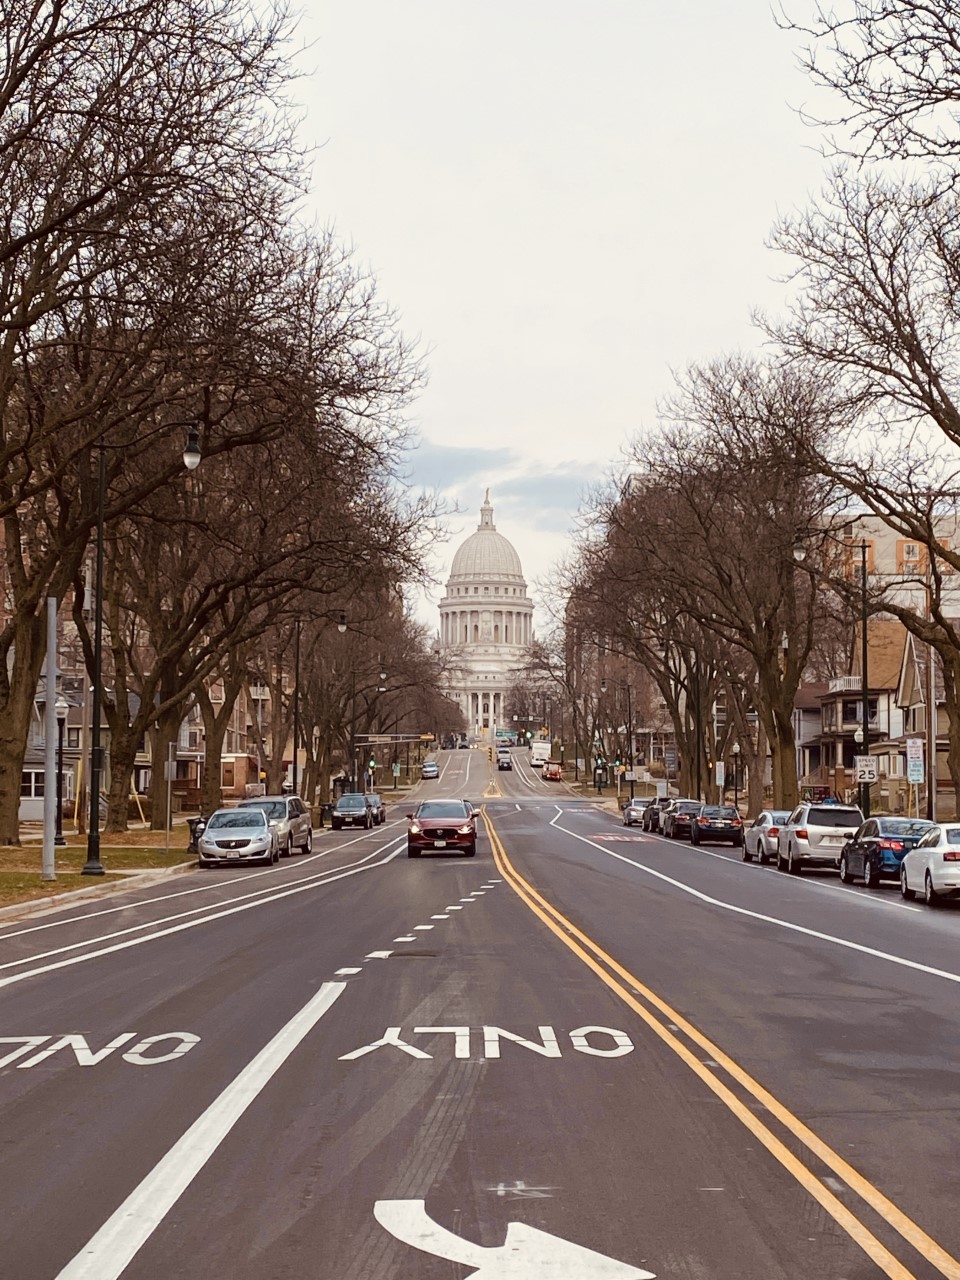 A photo of the Capitol building from a far away street view. The photo is taken from the road, with the Capitol surrounded by trees. The sky is cloudy.